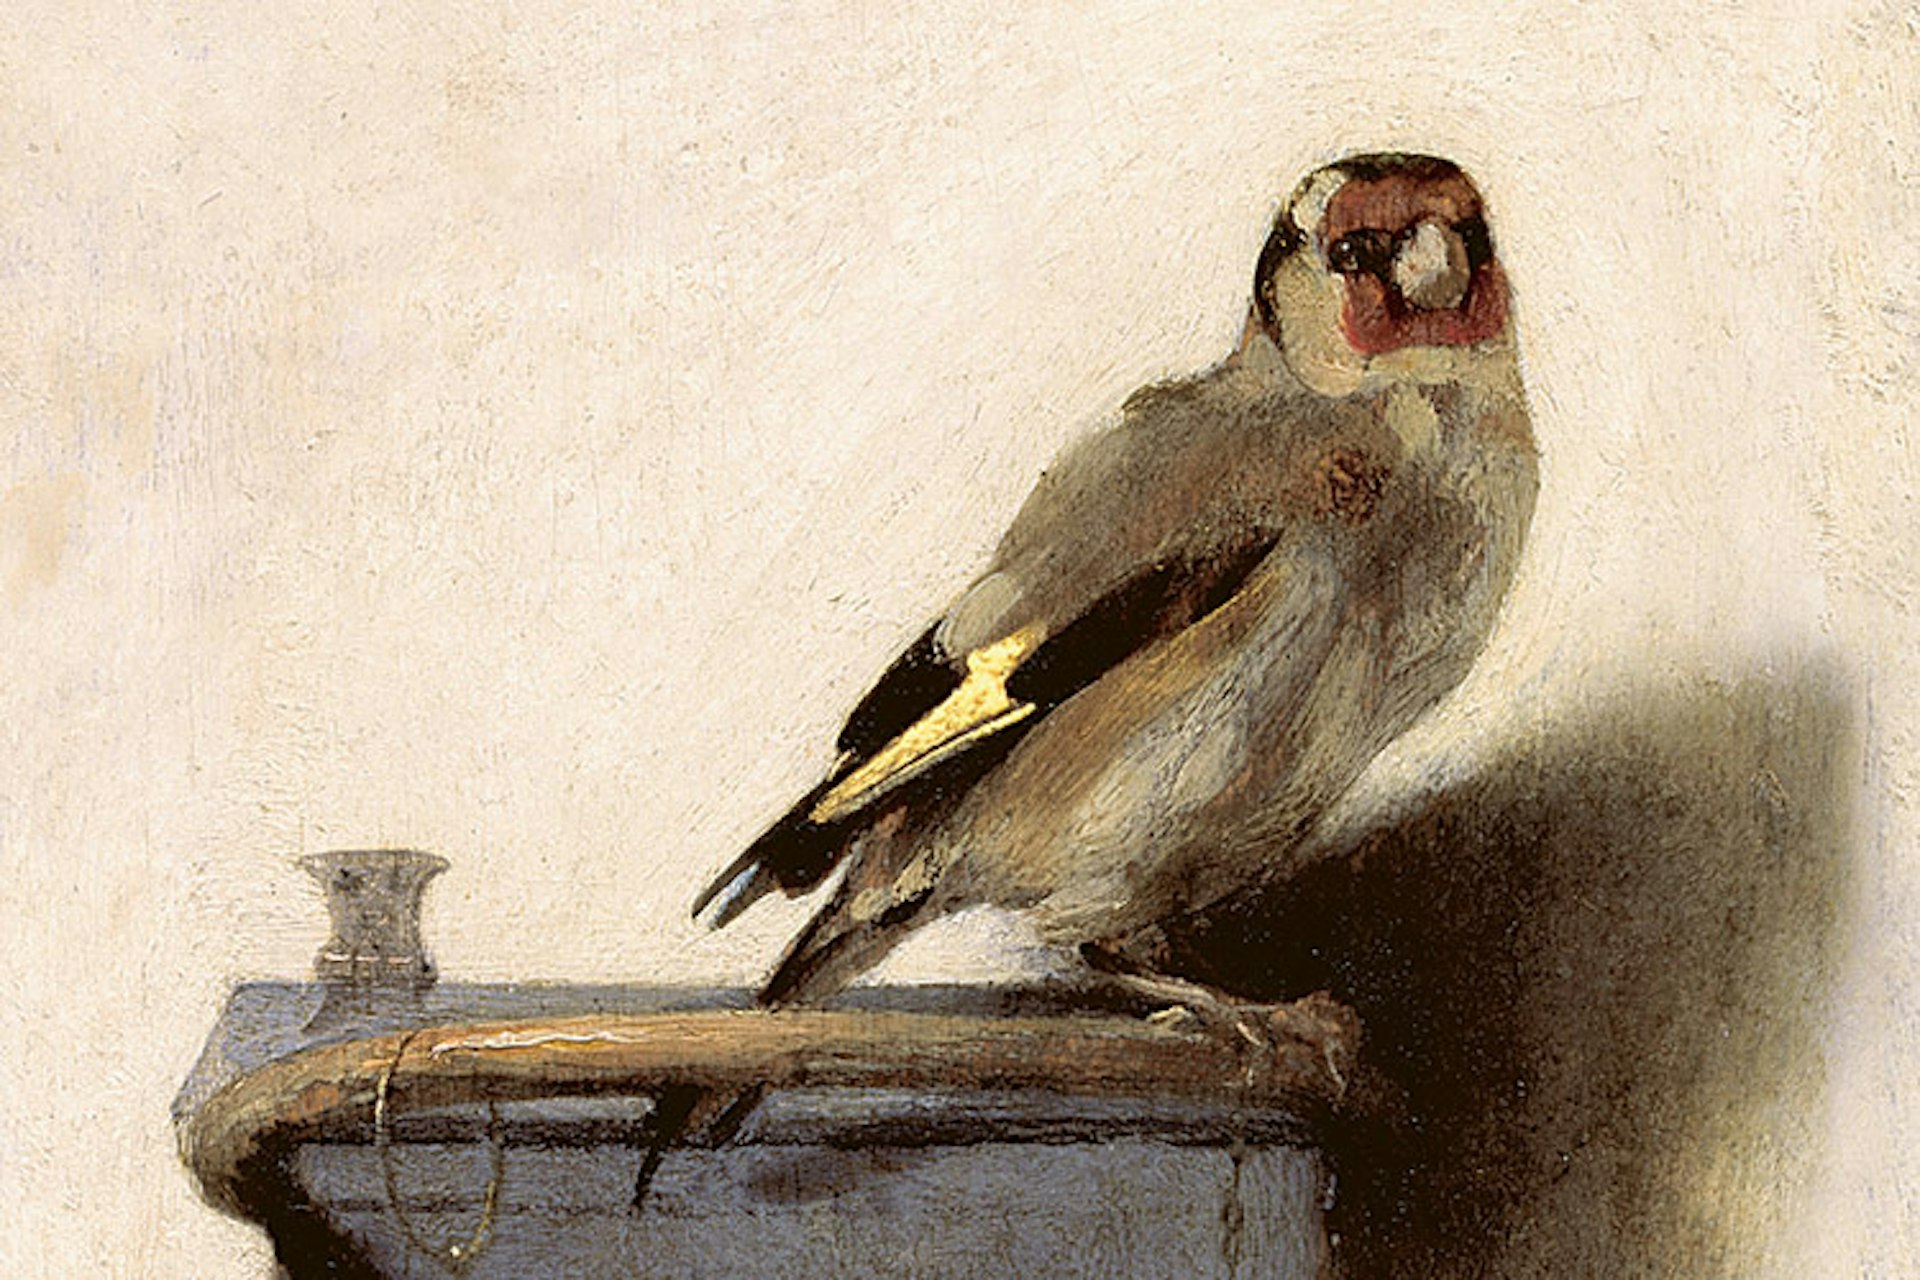 A detail from Fabritius' The Goldfinch. Image from Wikimedia Commons